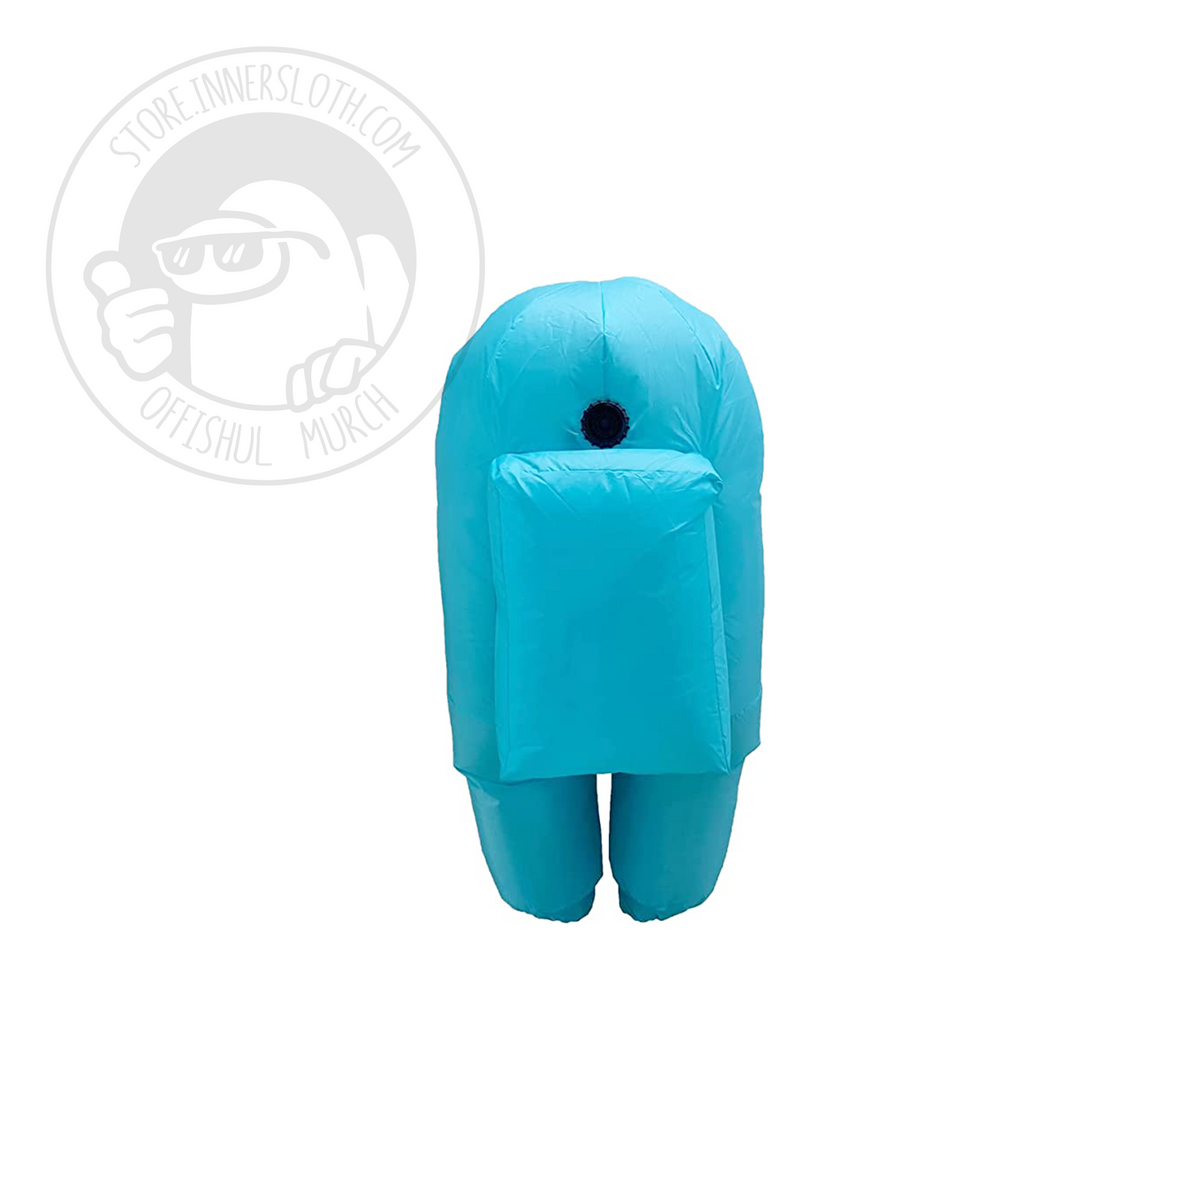 Back view of Cyan inflatable Crewmate costume.